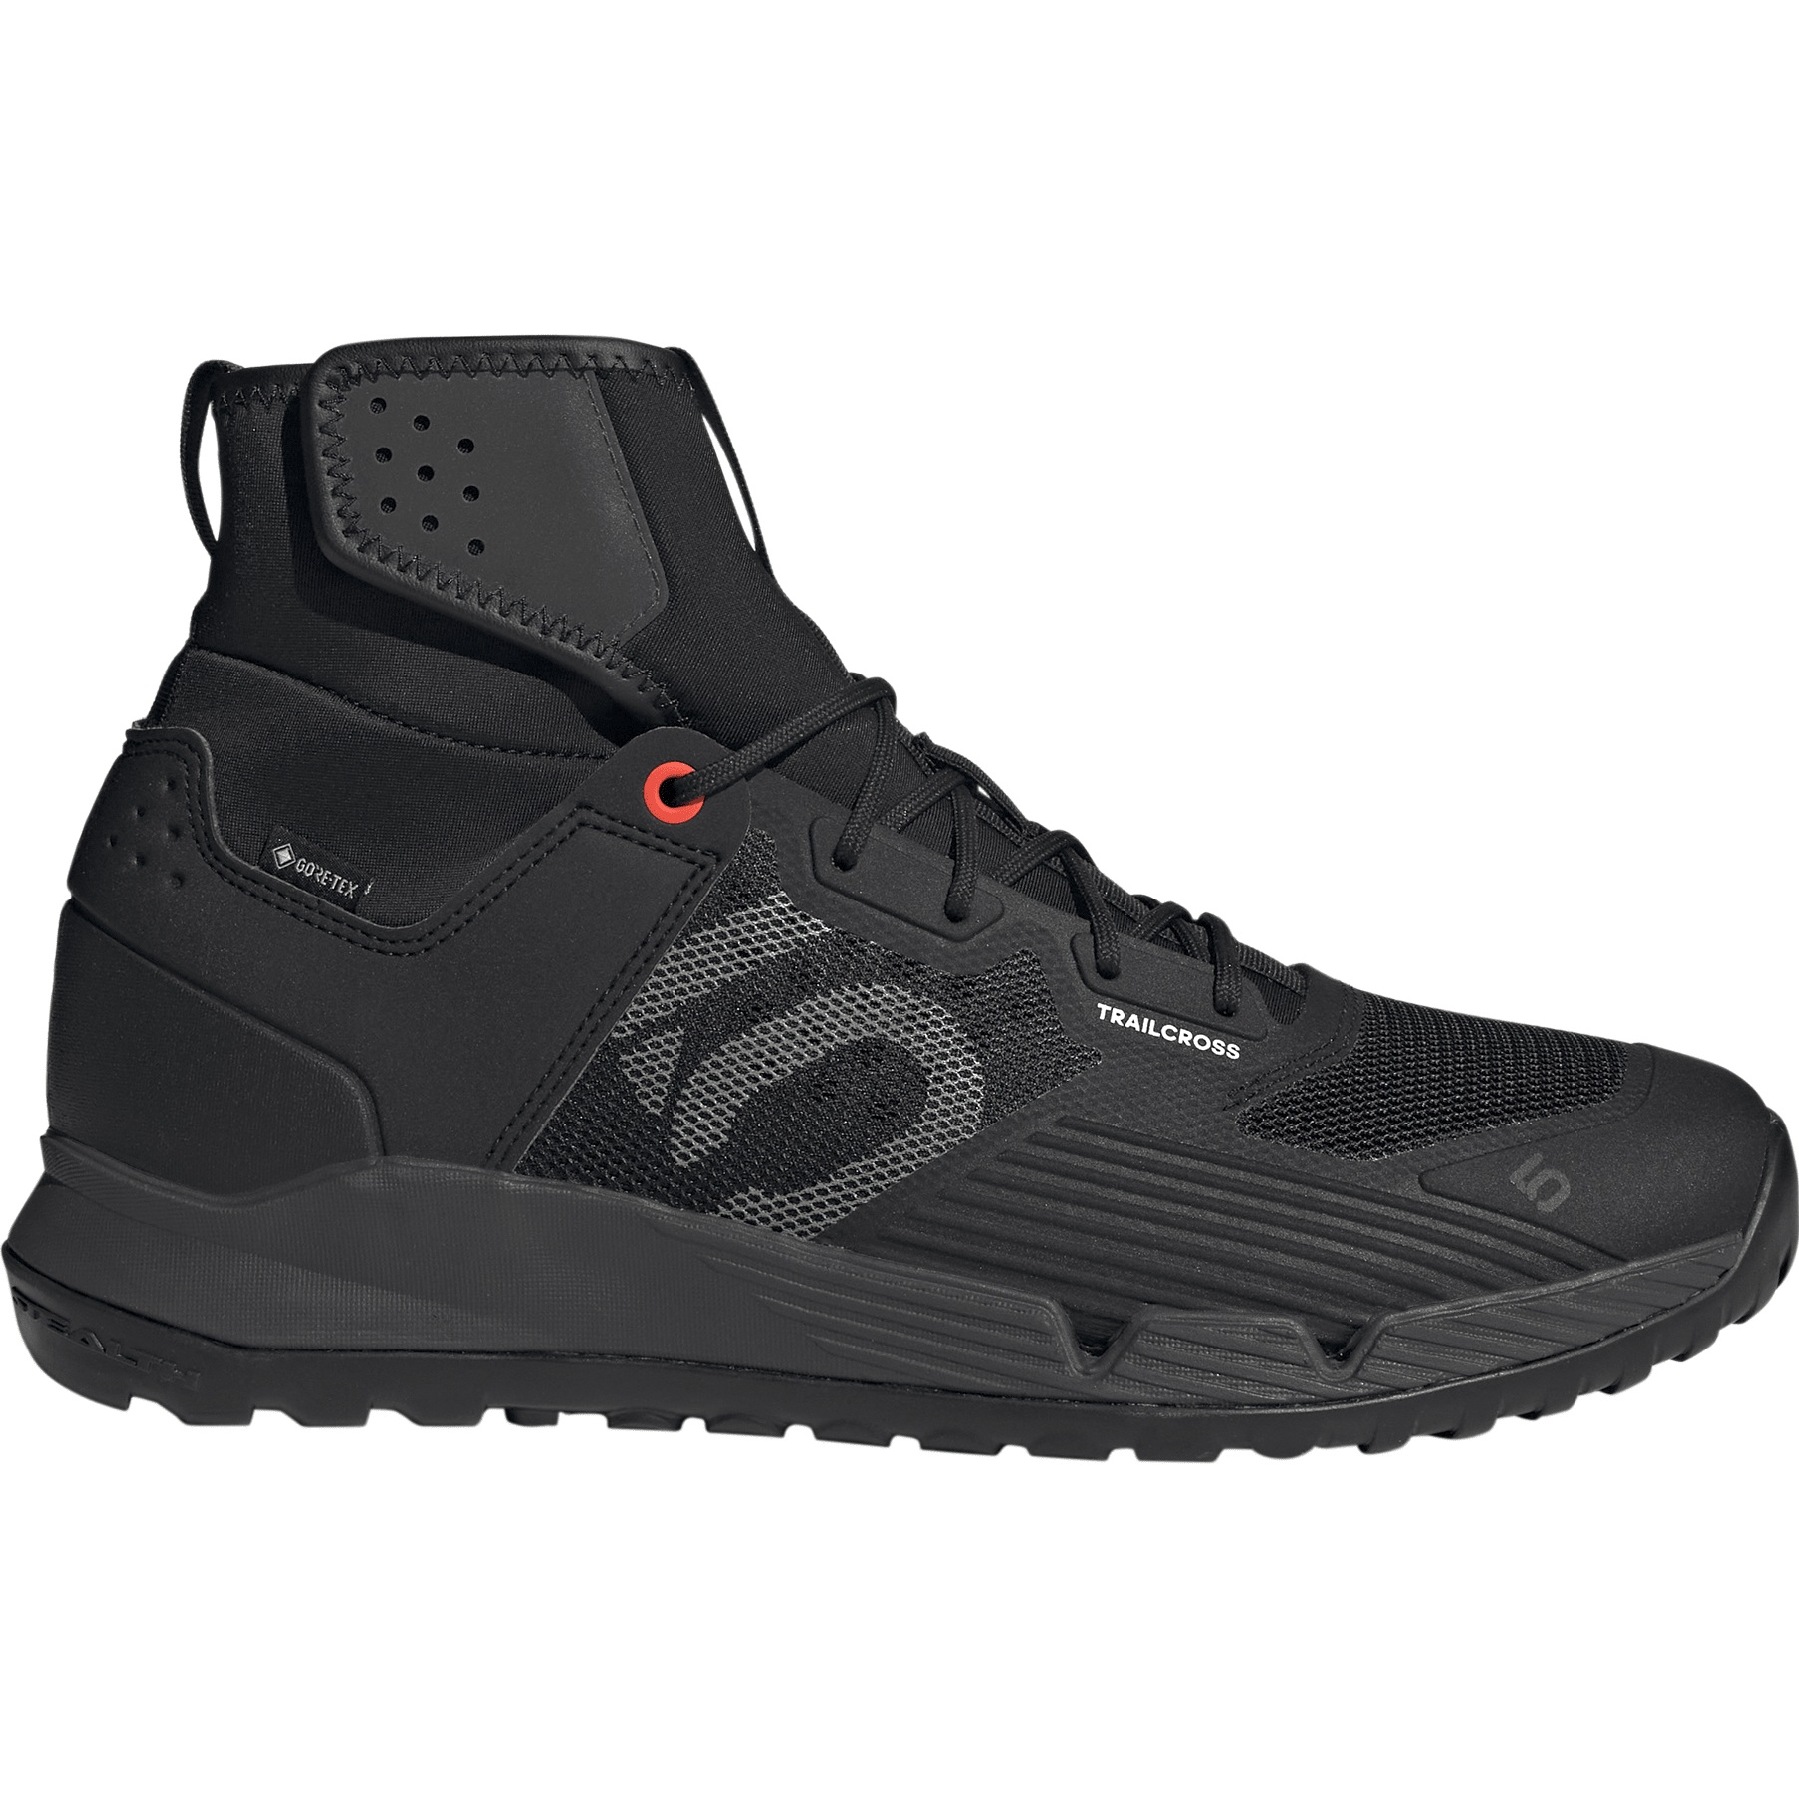 Picture of Five Ten Trailcross Gore-Tex Mountainbike Shoes - Core Black / Grey Three / Solar Red